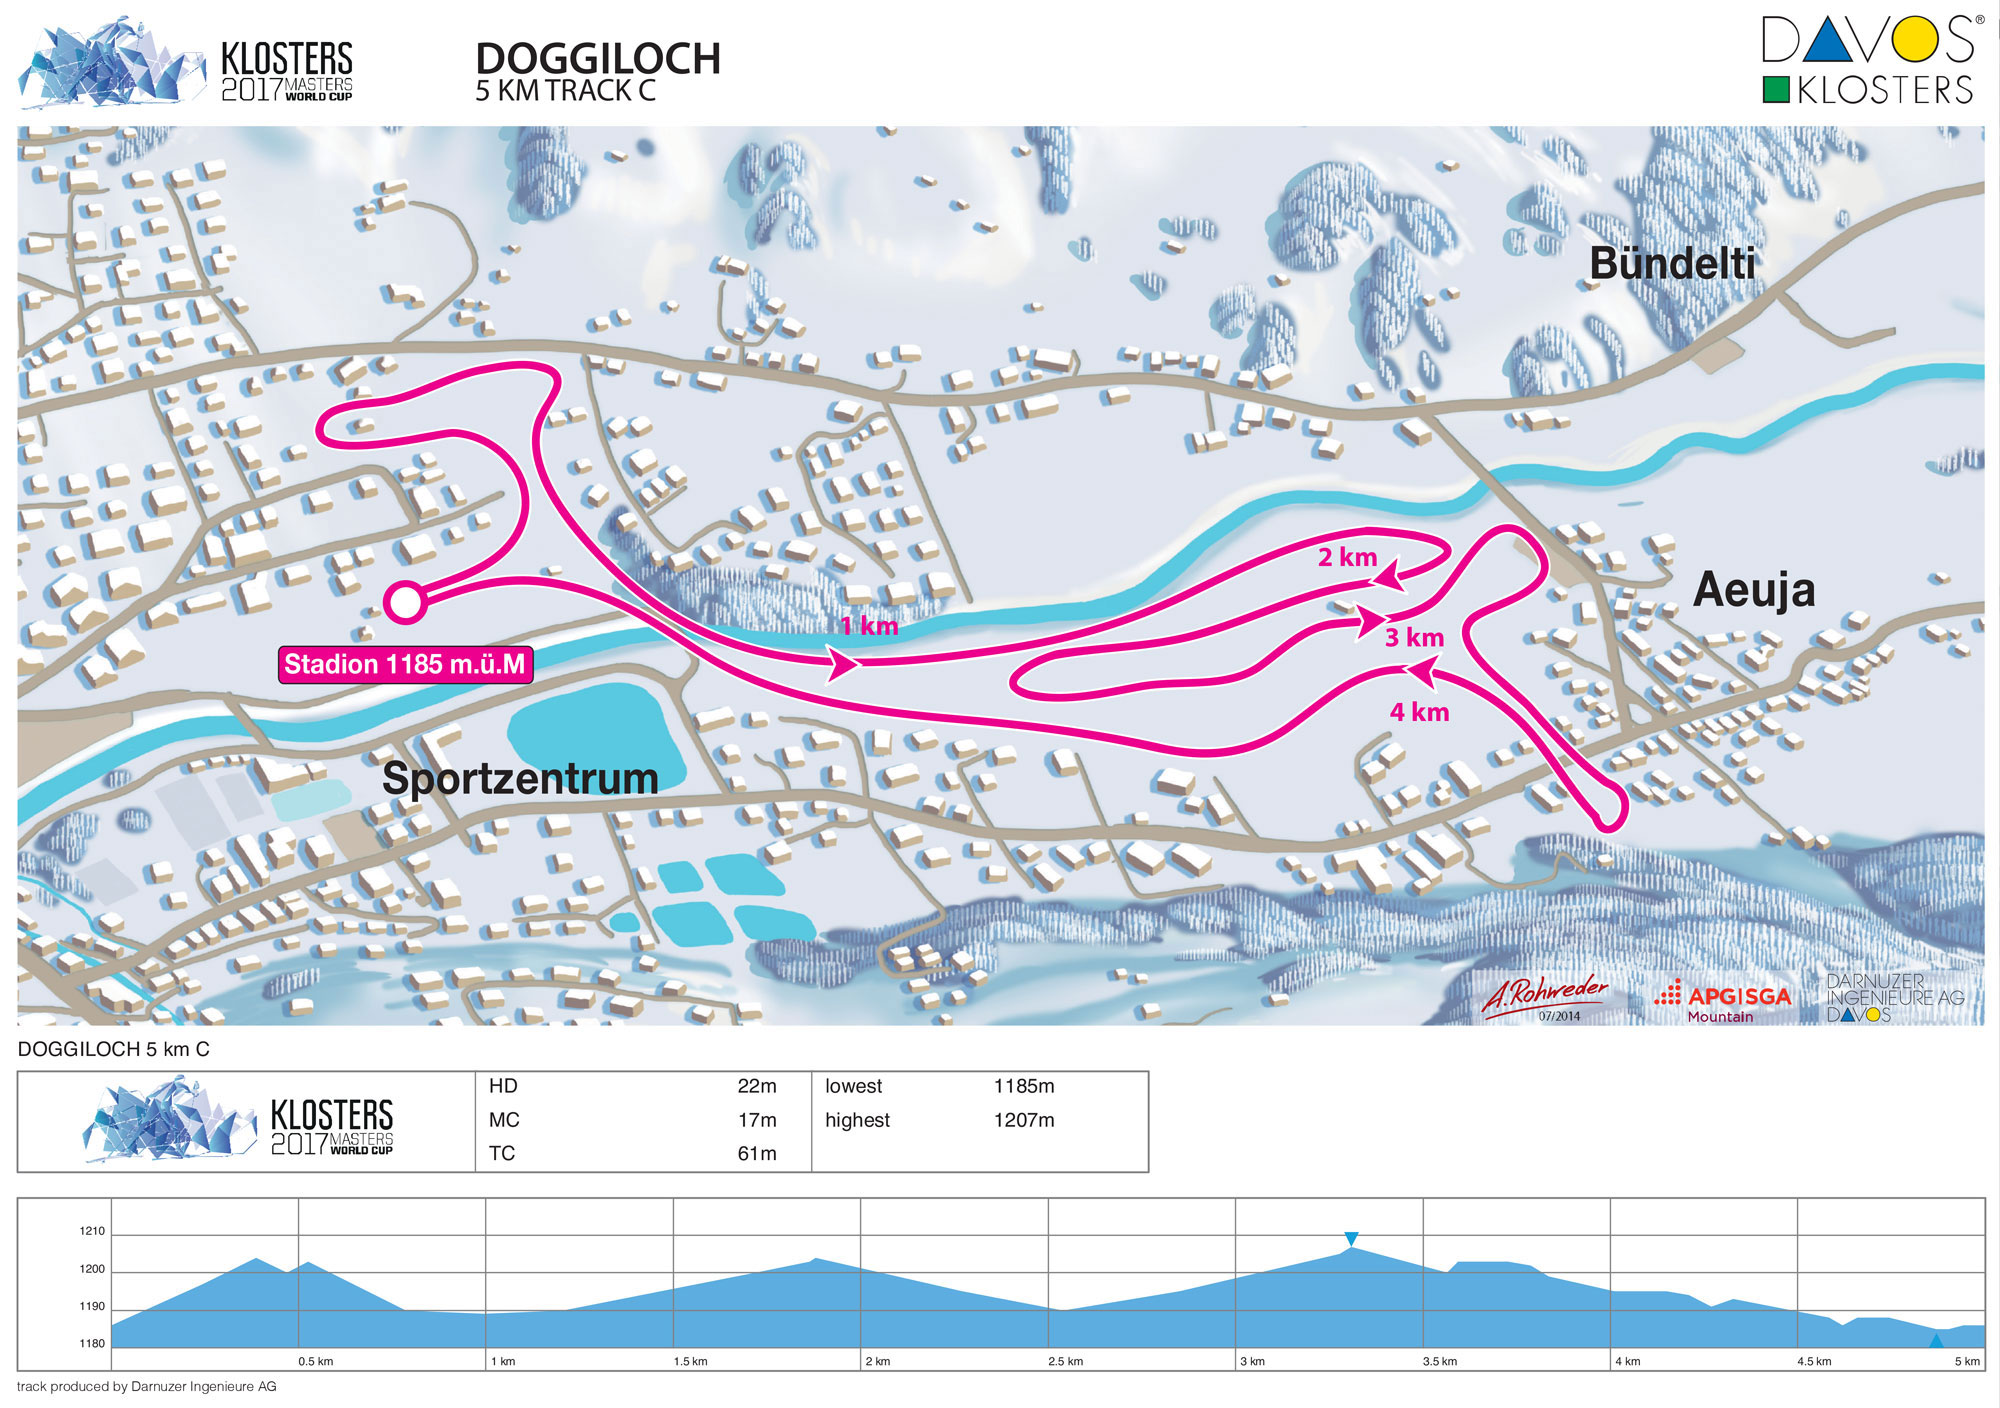 Davos Klosters Doggiloch Cross Country Skiing Trail Map